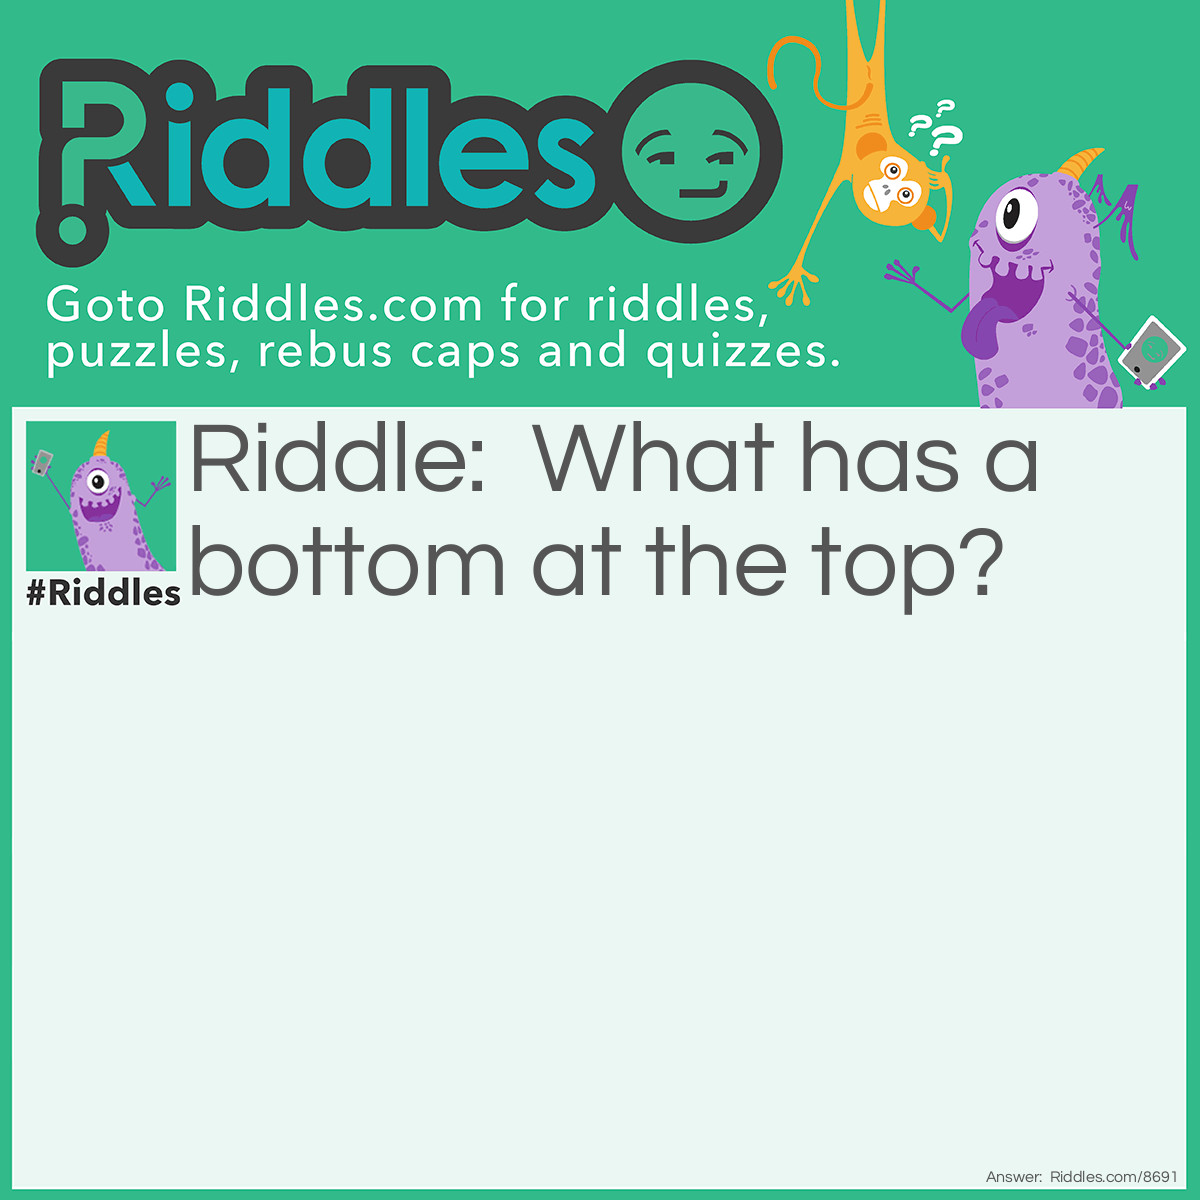 Riddle: What has a bottom at the top? Answer: Your legs!